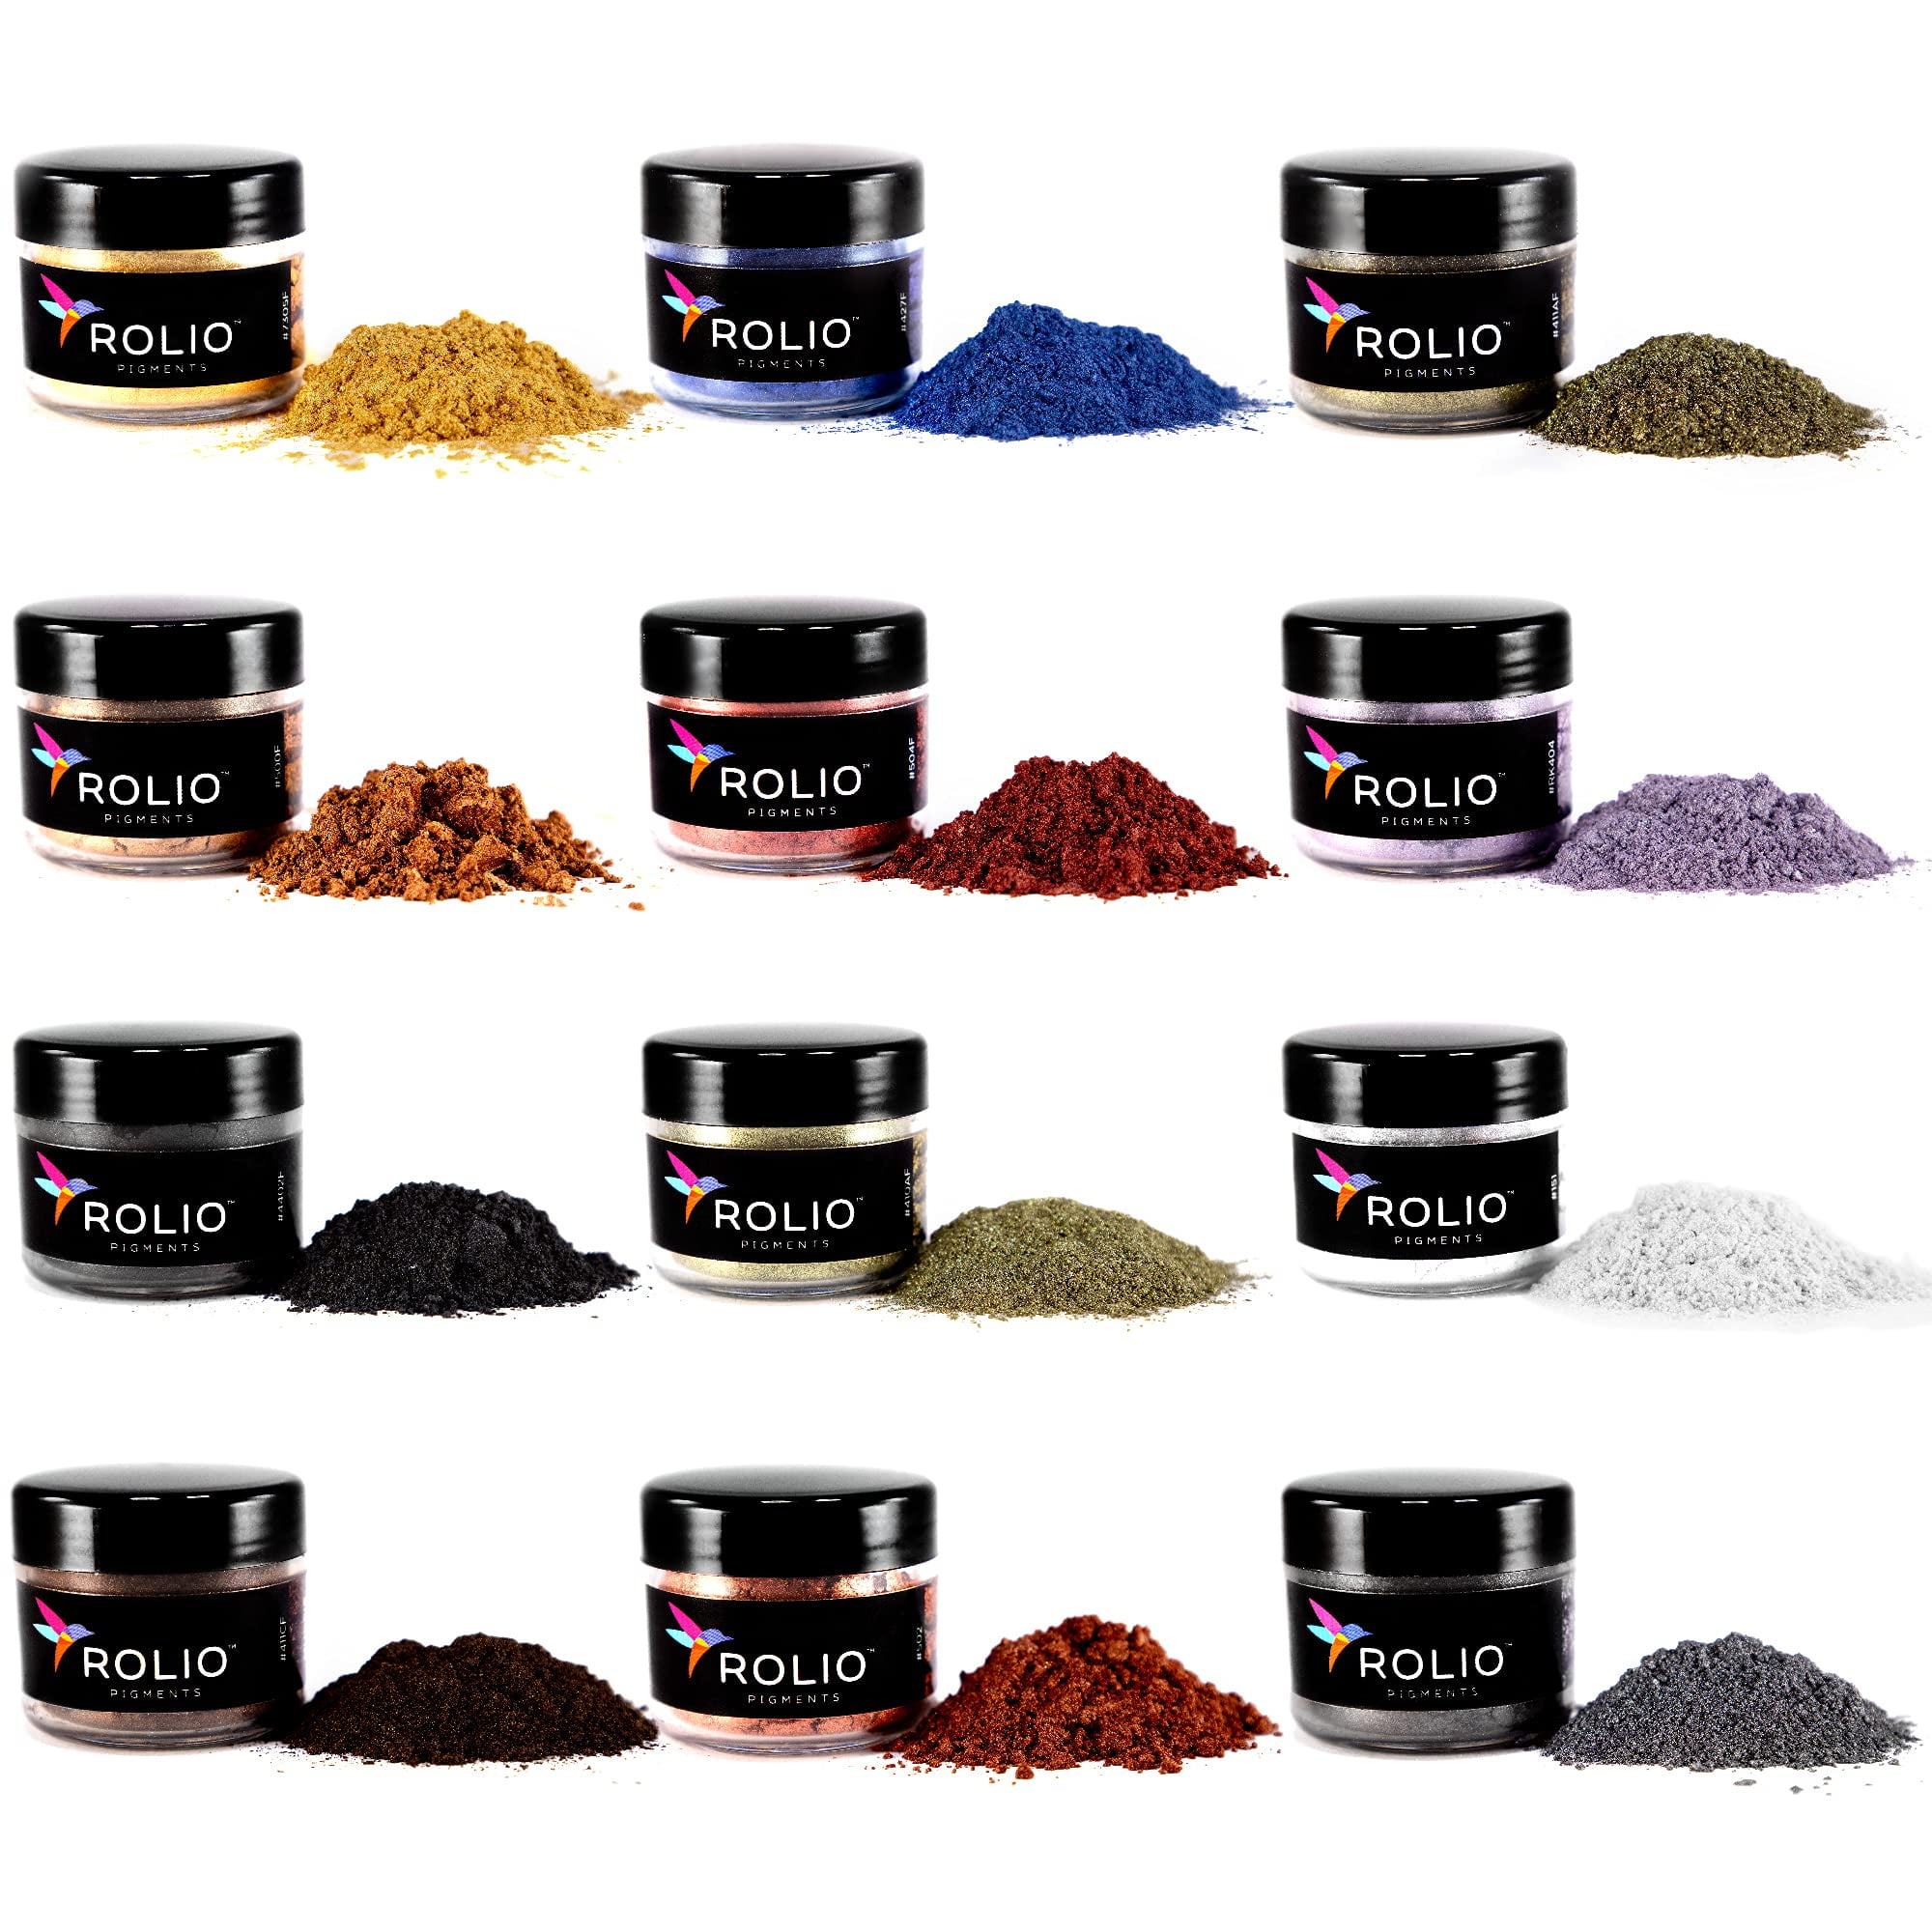  Rolio - Mica Powder - 1 LB of Pigment for Paint, Dye, Soap  Making, Nail Polish, Epoxy Resin, Candle Making, Bath Bombs, Slime -  (Graphite Black)